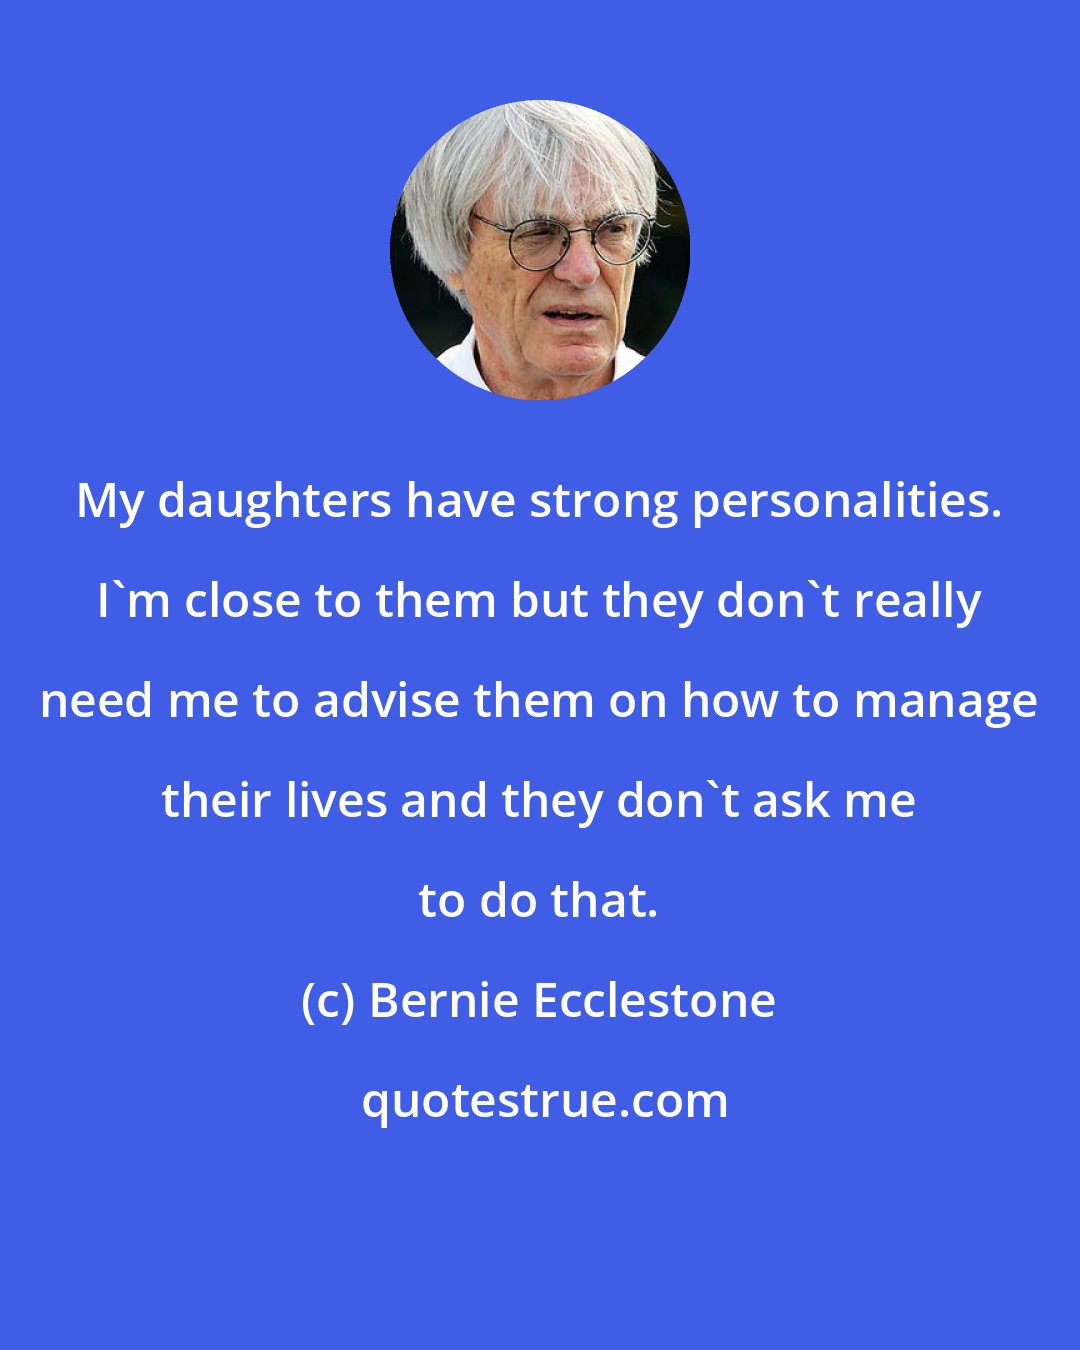 Bernie Ecclestone: My daughters have strong personalities. I'm close to them but they don't really need me to advise them on how to manage their lives and they don't ask me to do that.